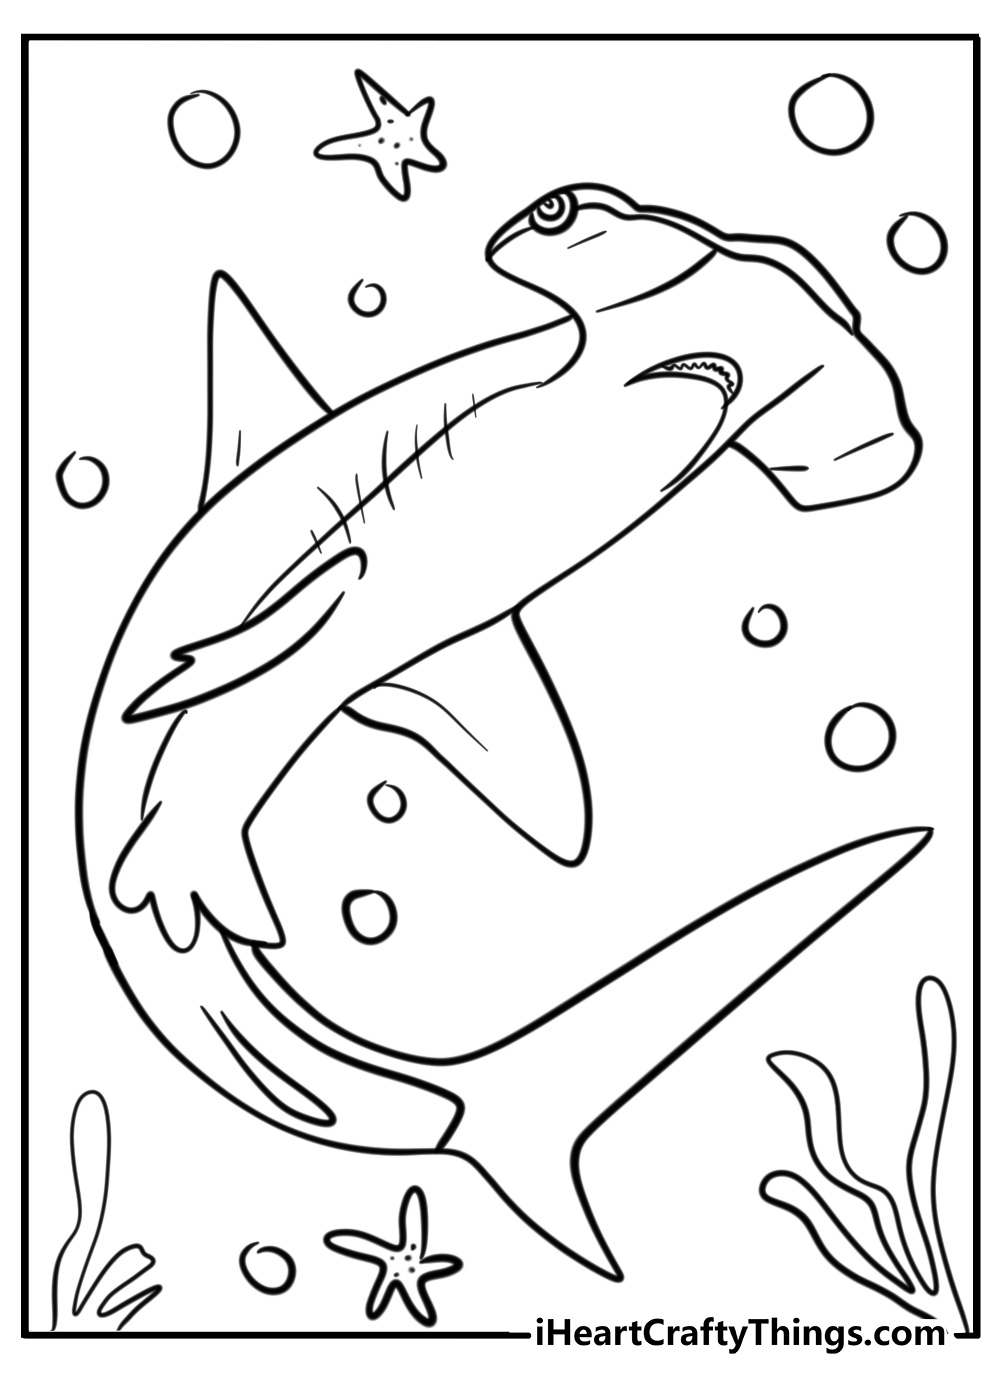 Realistic hammerhead shark coloring page with anchor